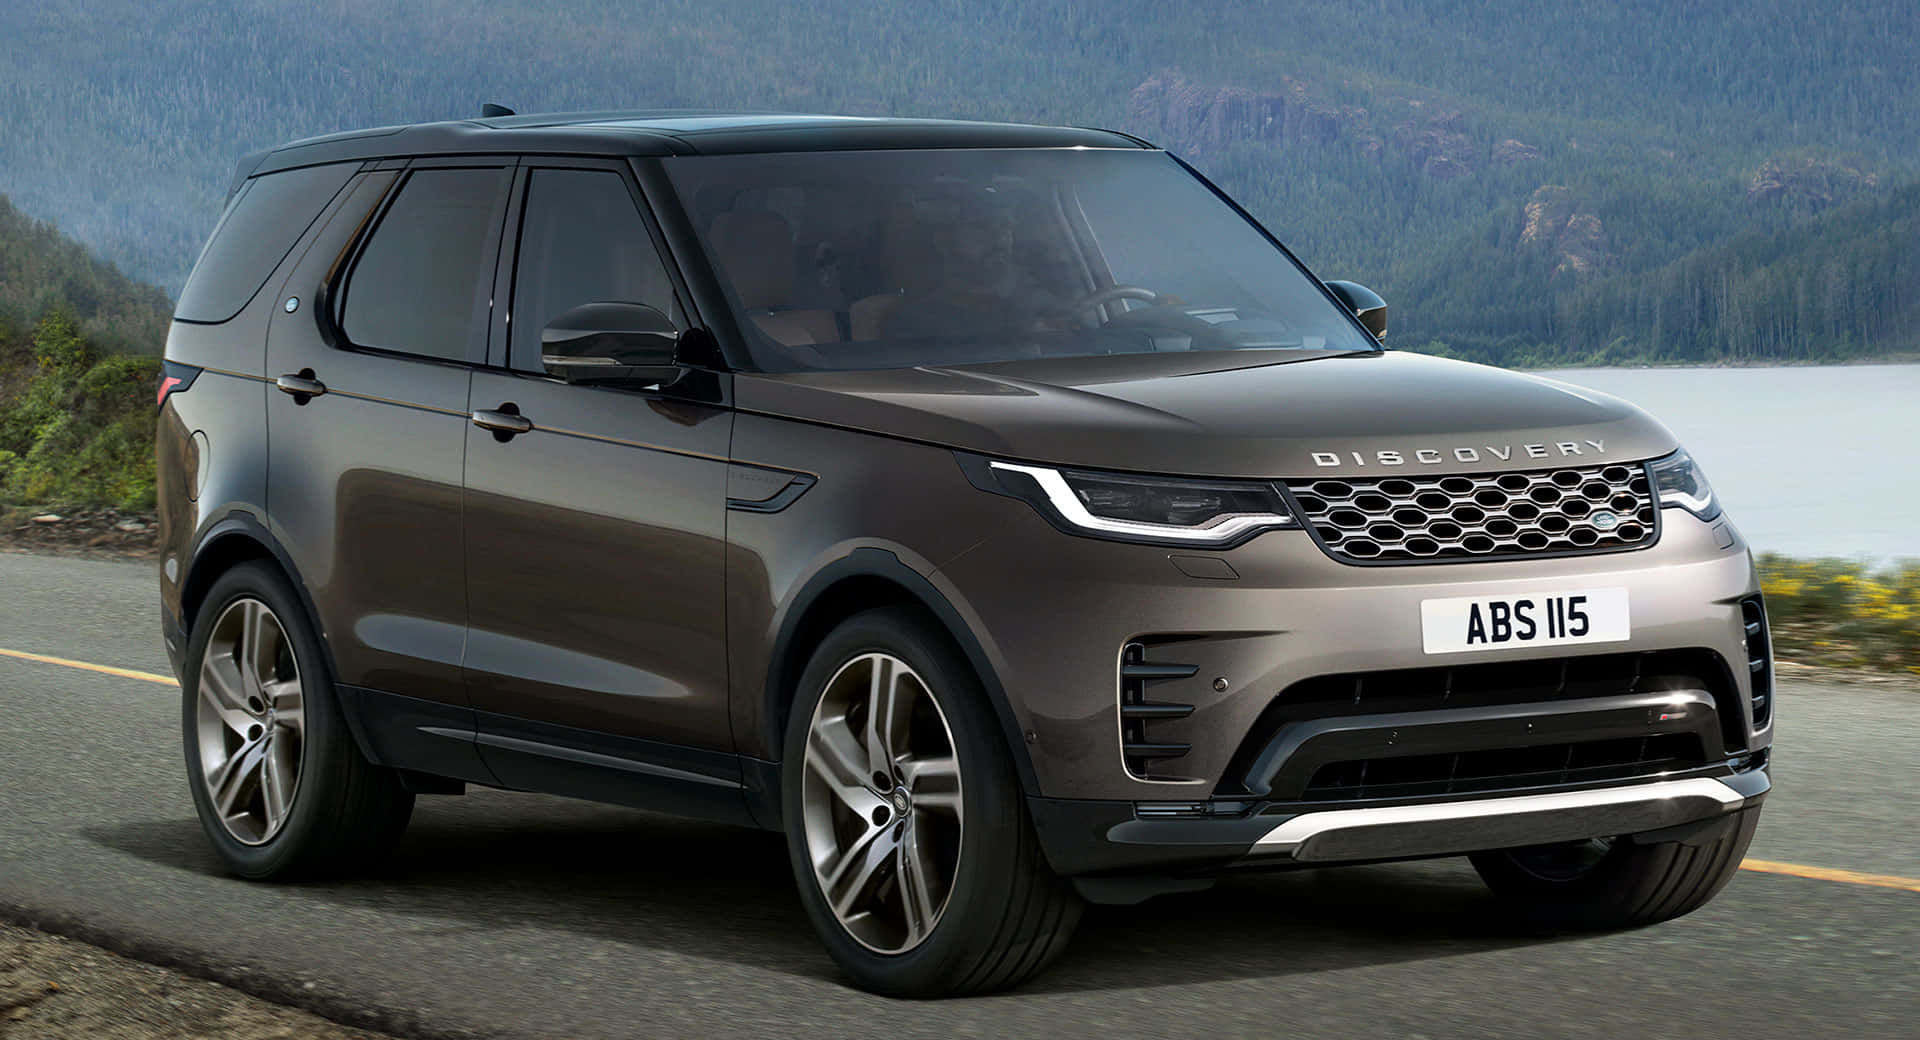 A stunning Land Rover Discovery against a scenic mountain backdrop Wallpaper